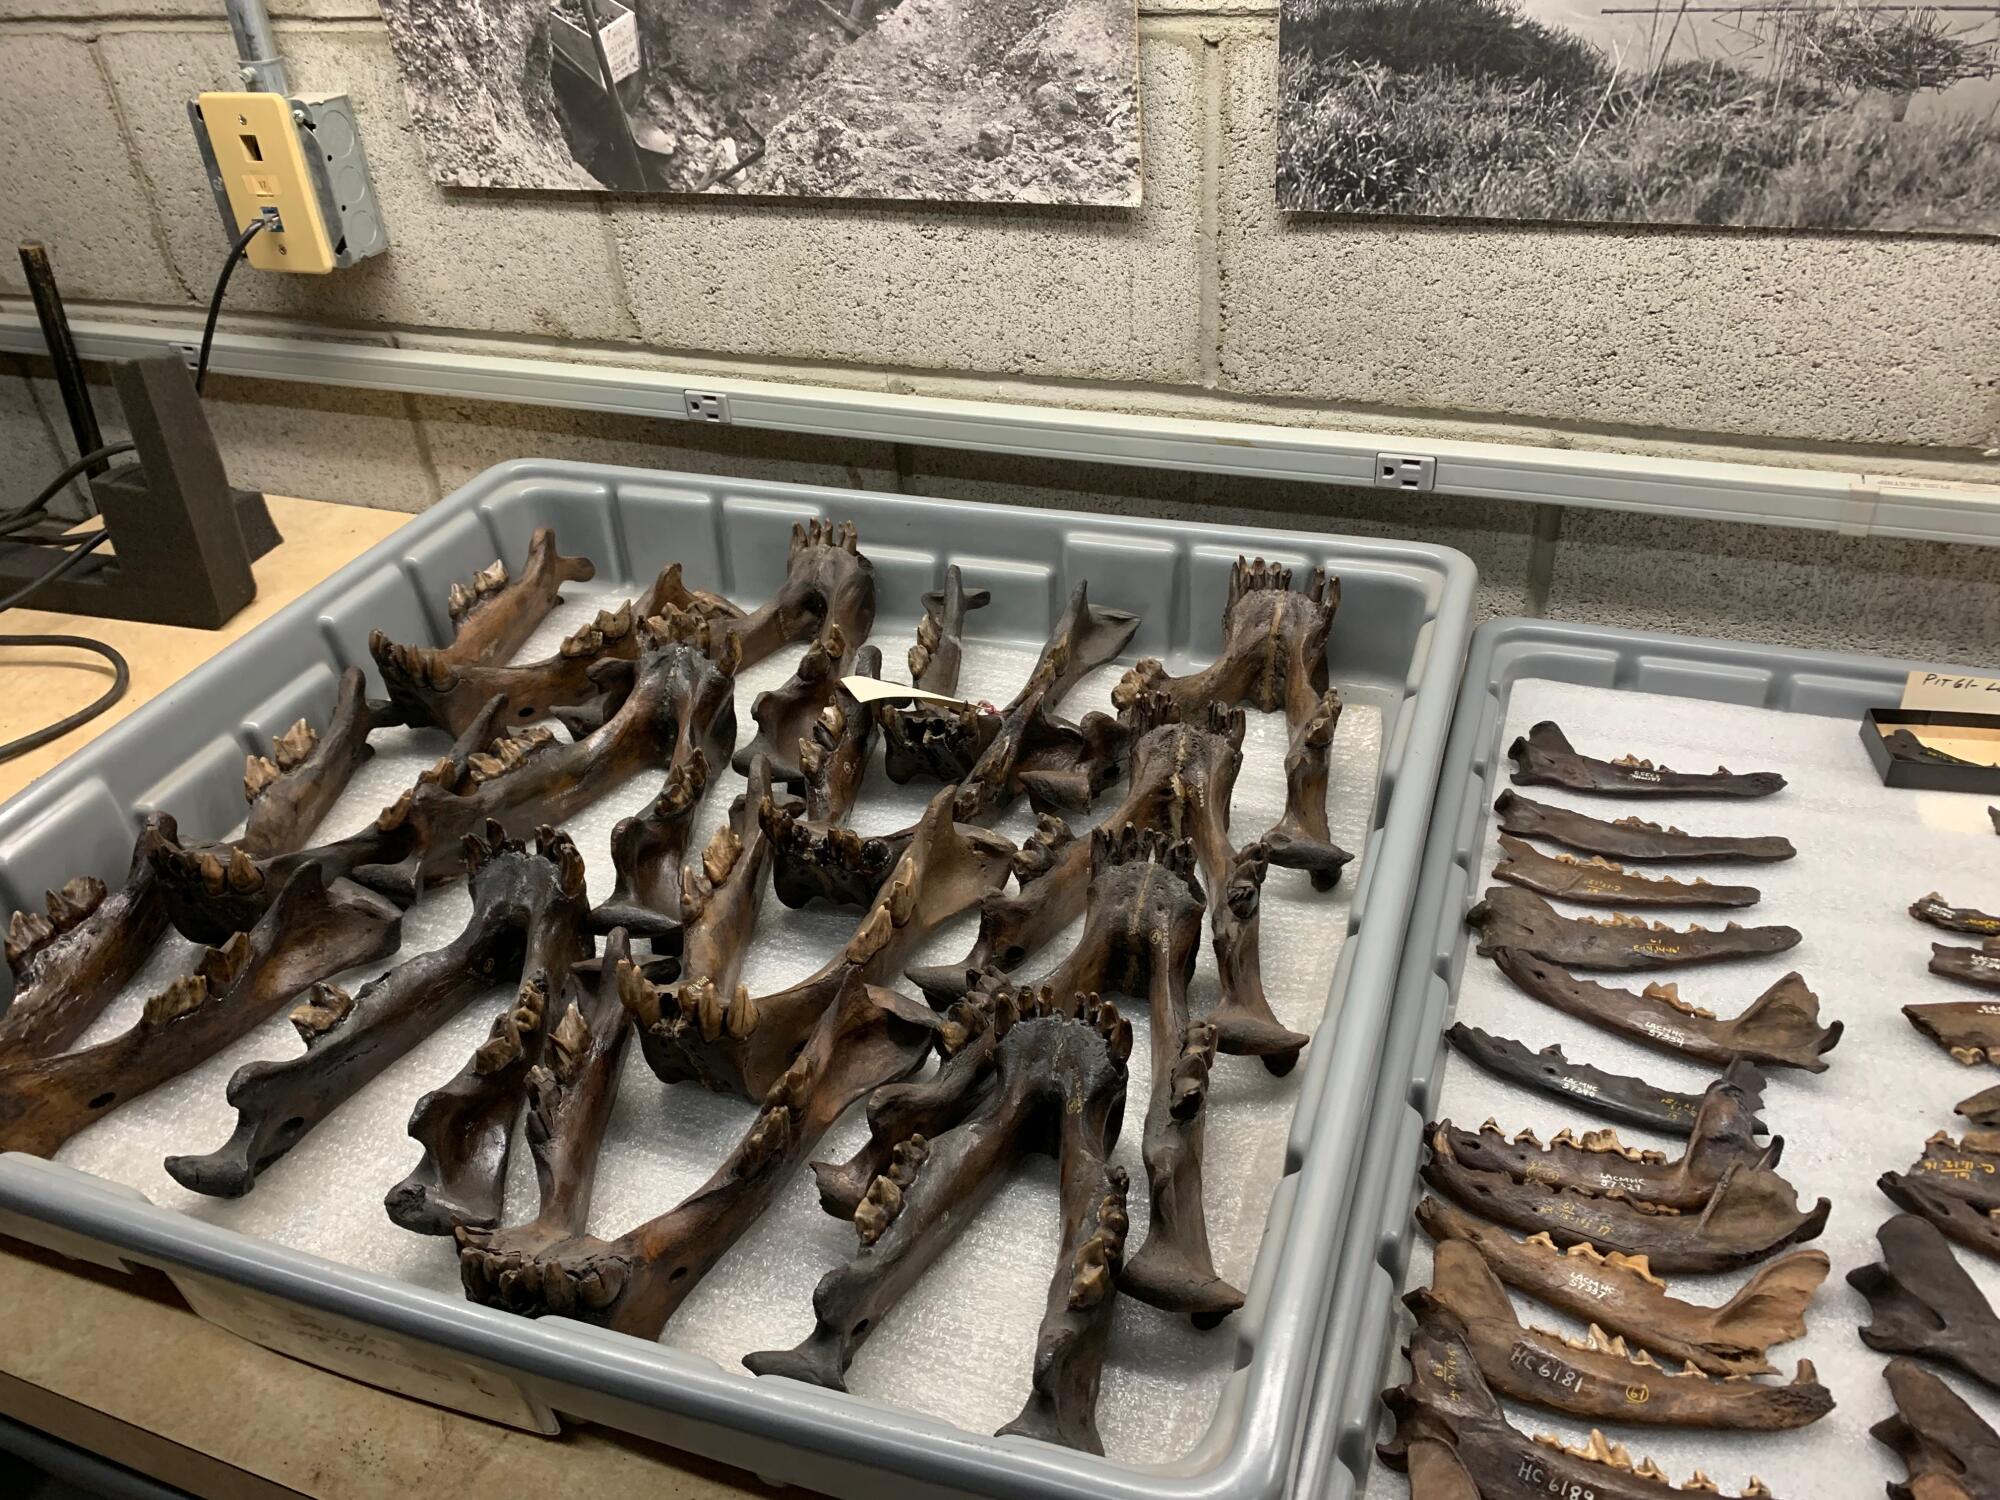 Fossils of animal jaws on trays